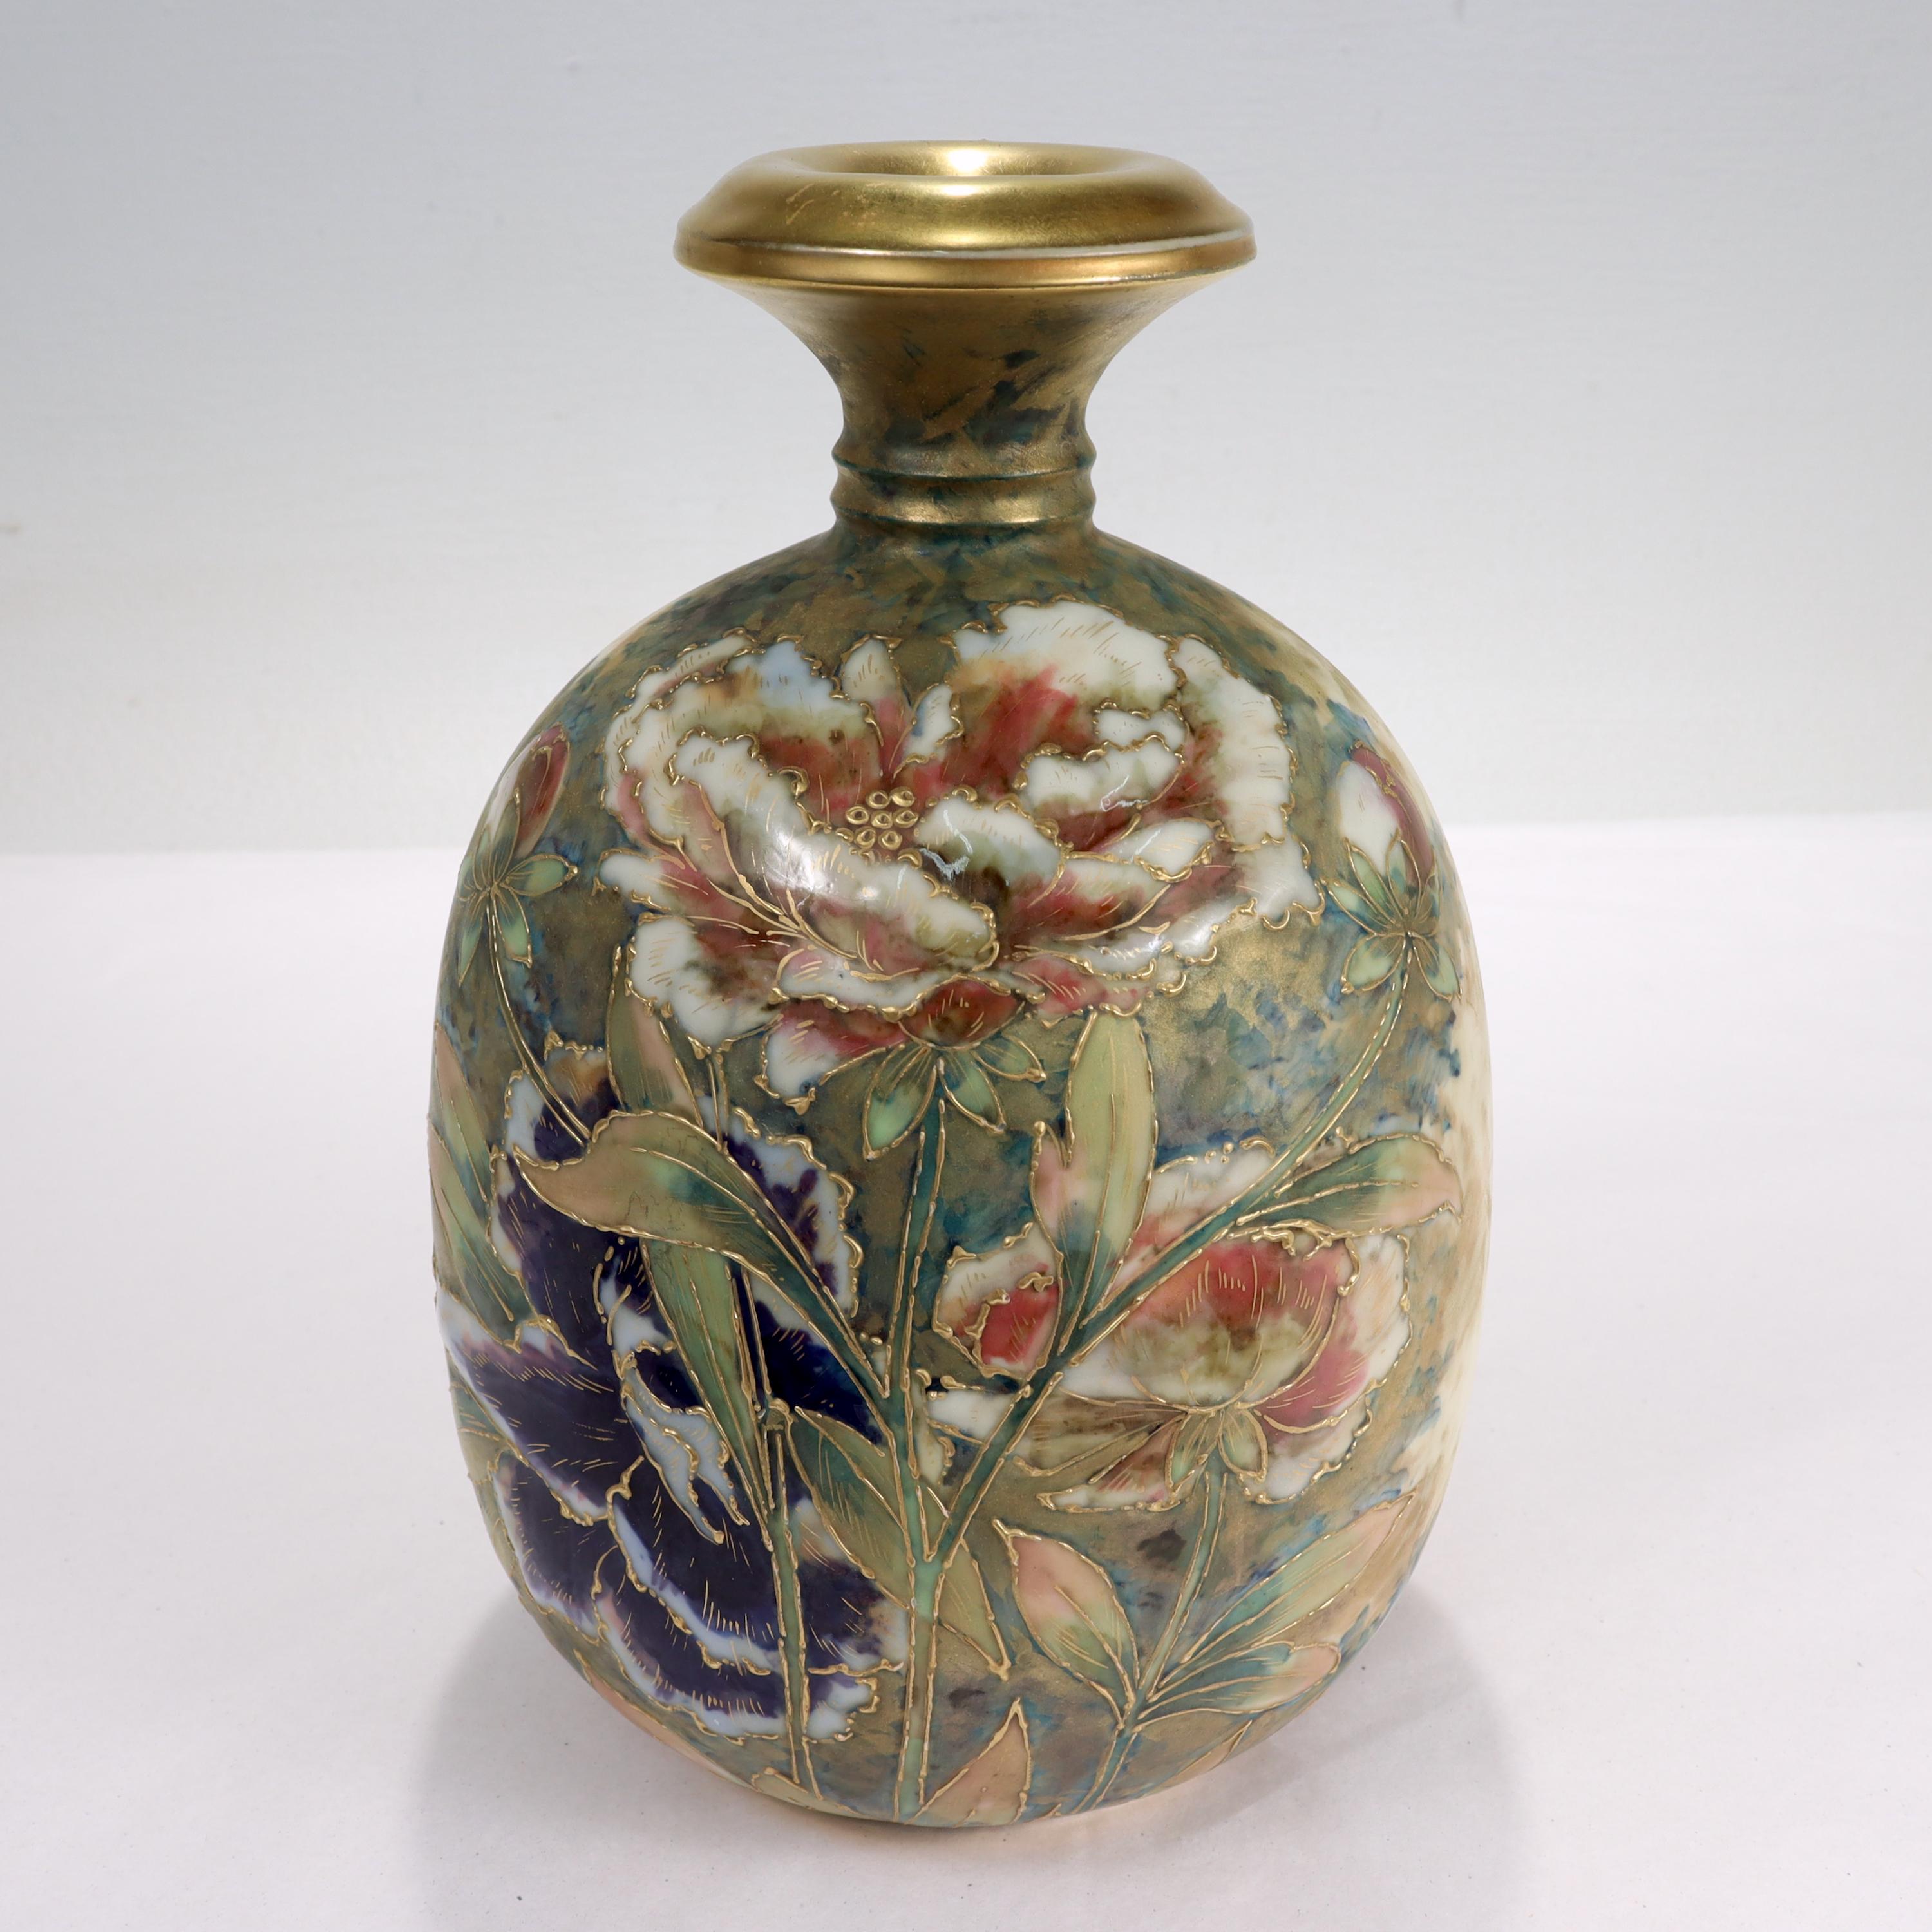 A fine antique Art Nouveau amphora vase.

With matte & enamel peony flowers painted over a matte forest scene ground. 

Form no. 523.

From the Turn-Teplitz region.

Simply a lovely vase from Amphora!

Date:
Late 19th or Early 20th Century

Overall